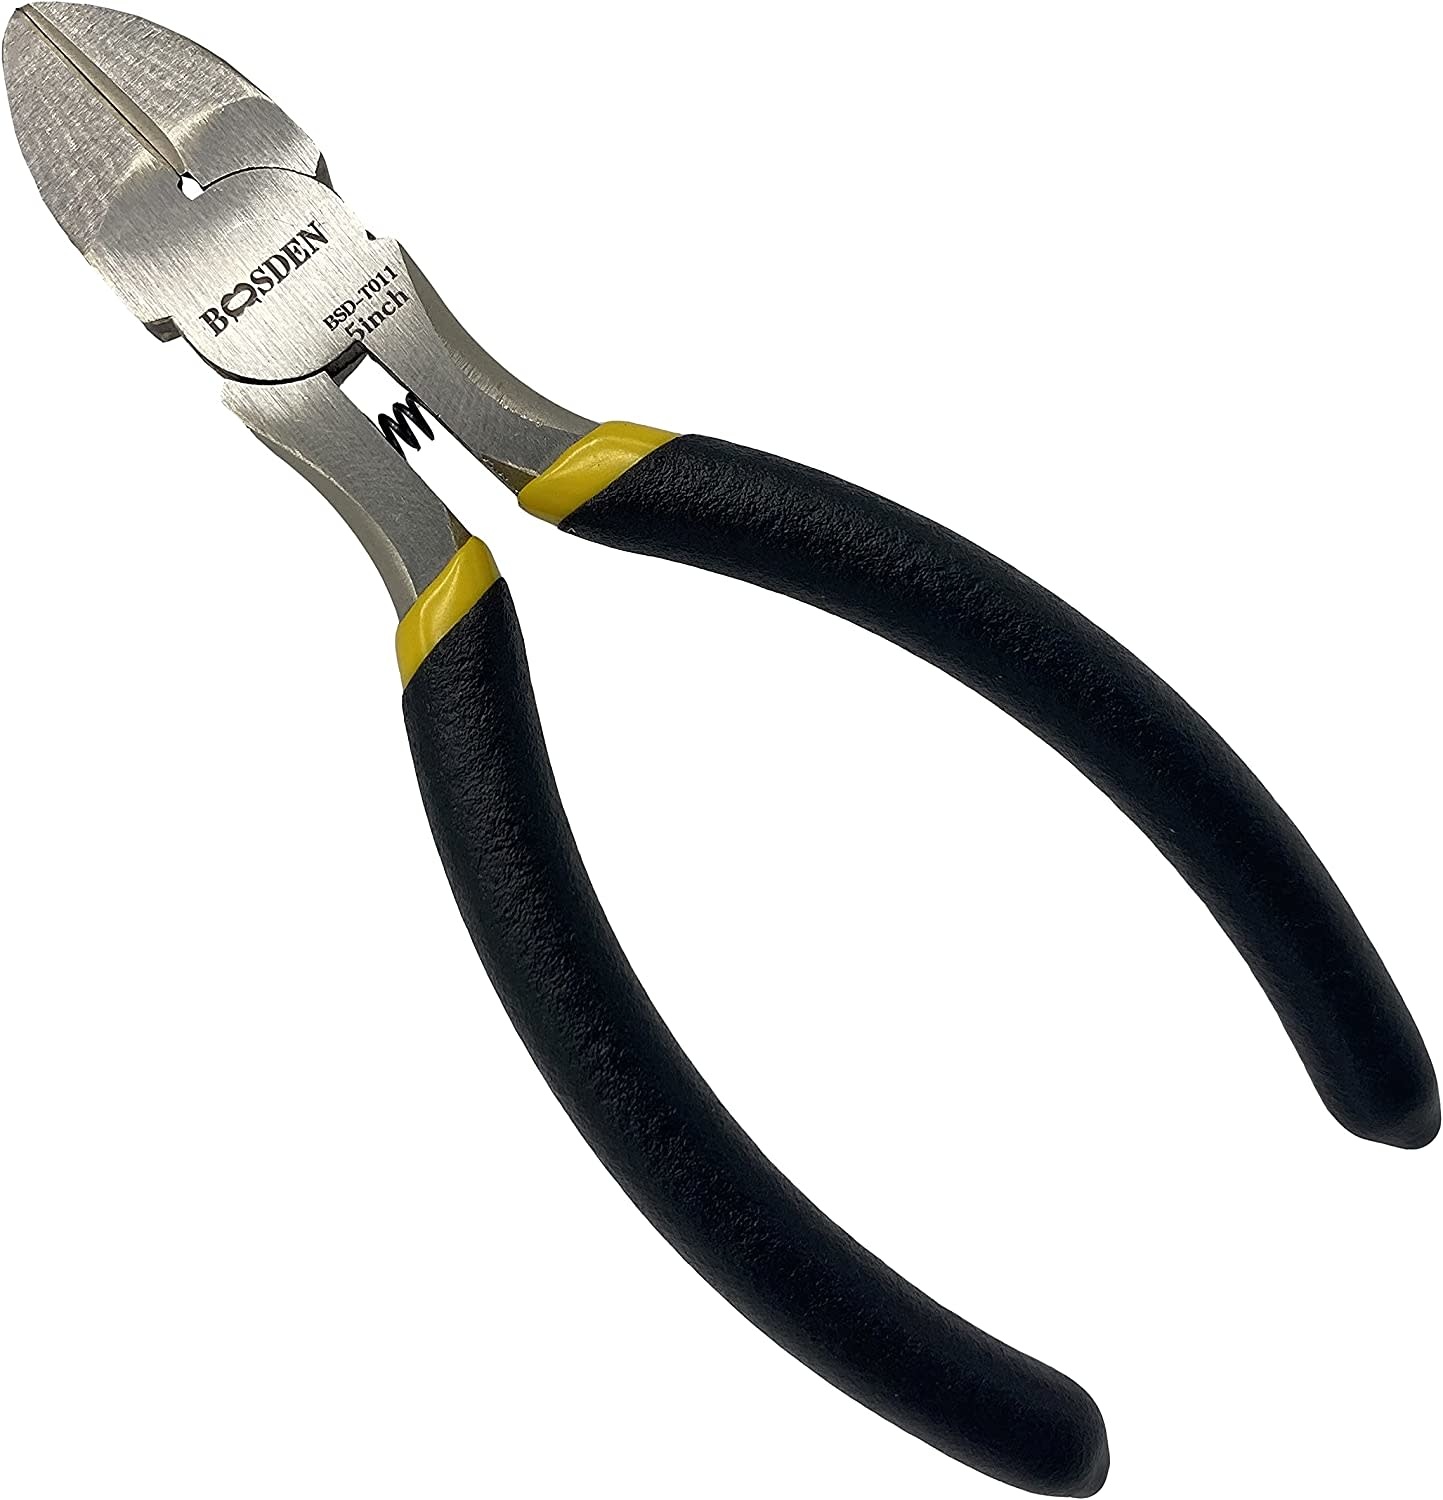 BSD-T028 - BOOSDEN - 5 Diagonal Cutters Wire Cutters, DIY Cutting Pliers,  Spring Loaded Side Cutters, Wire Snips for Jewelry Making and Wire Cutting  - RadioShack of Bozeman